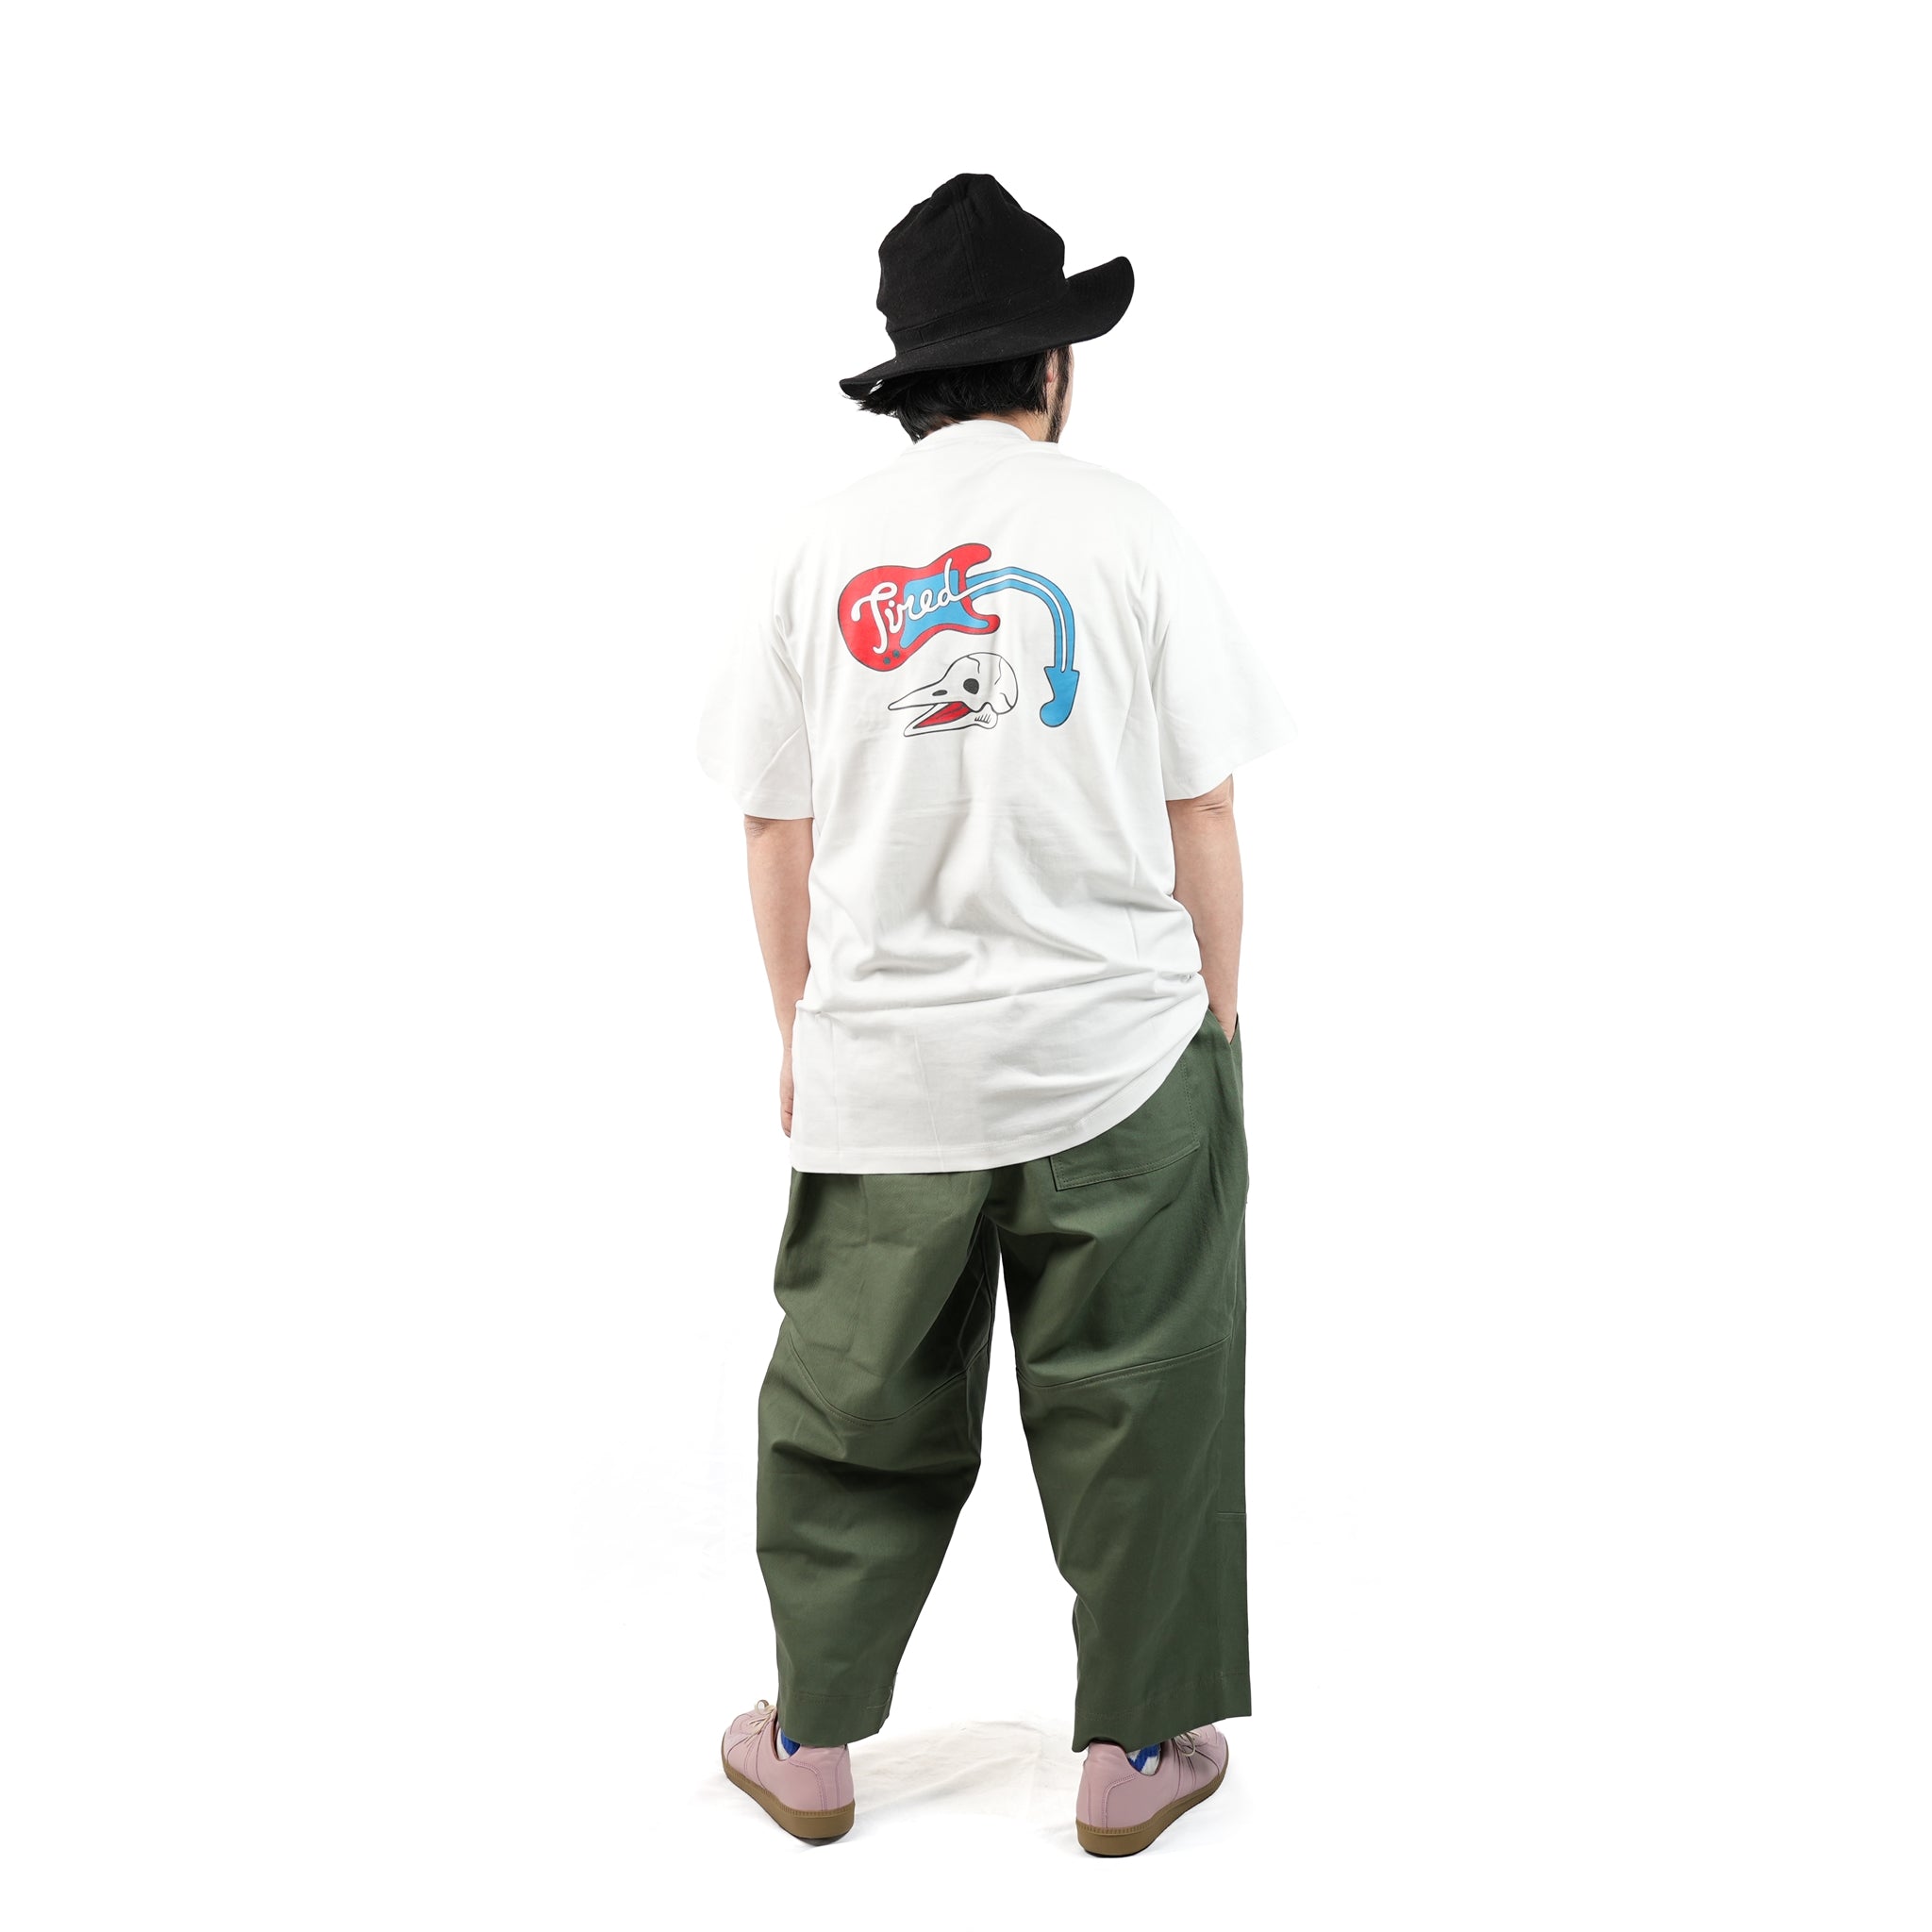 No:TS00254 | Name:MUSIC SS TEE (ORGANIC) | Color:White【TIRED_タイレッド】【ネコポス選択可能】